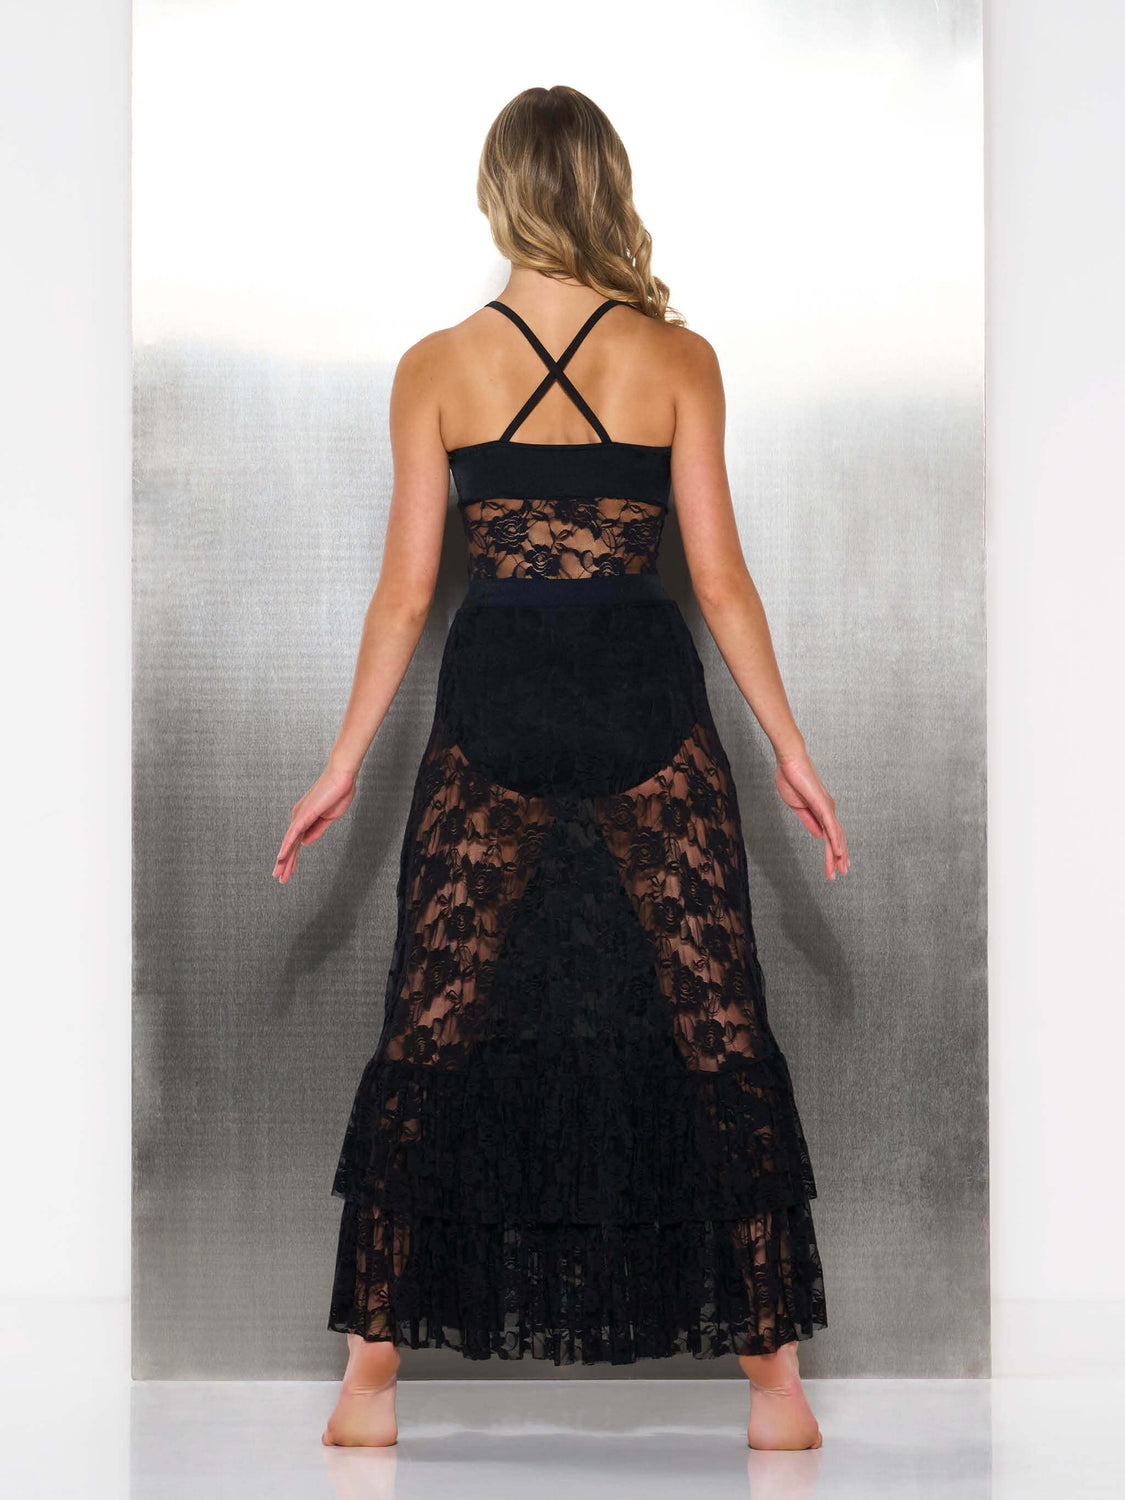 Shop fashionable The Grace in Lace Collection dance costumes